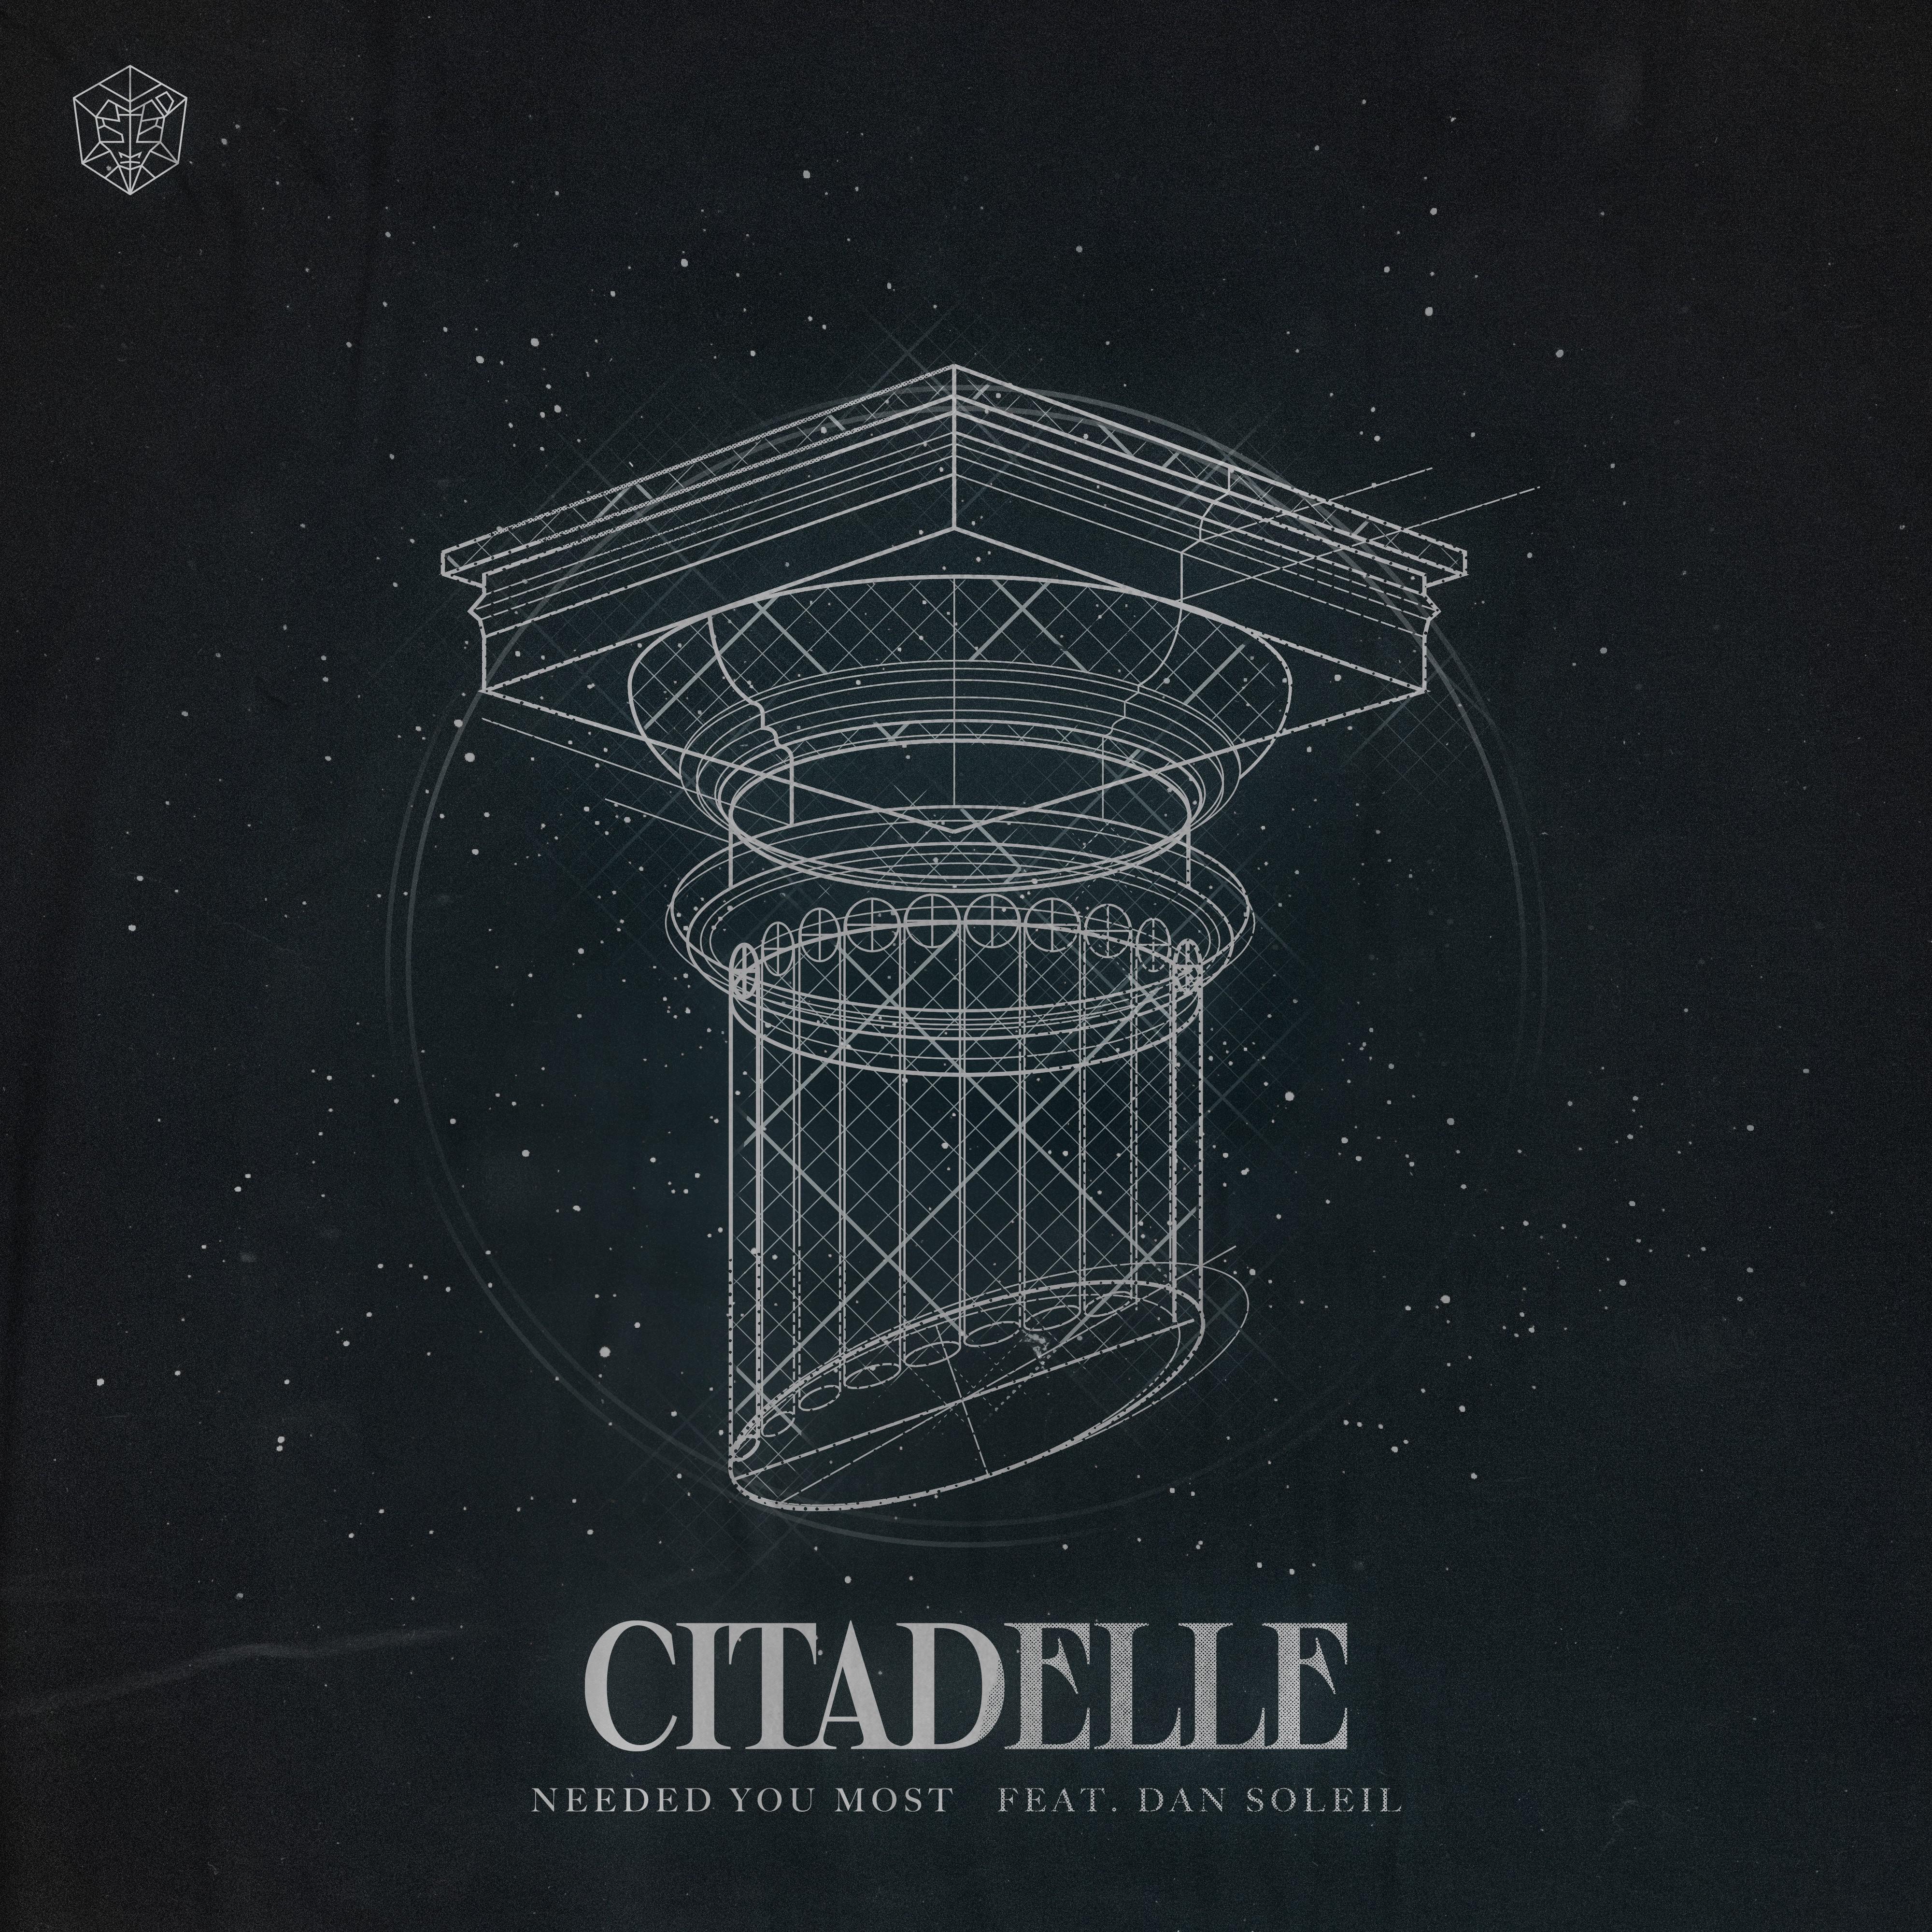 Citadelle - Needed You Most